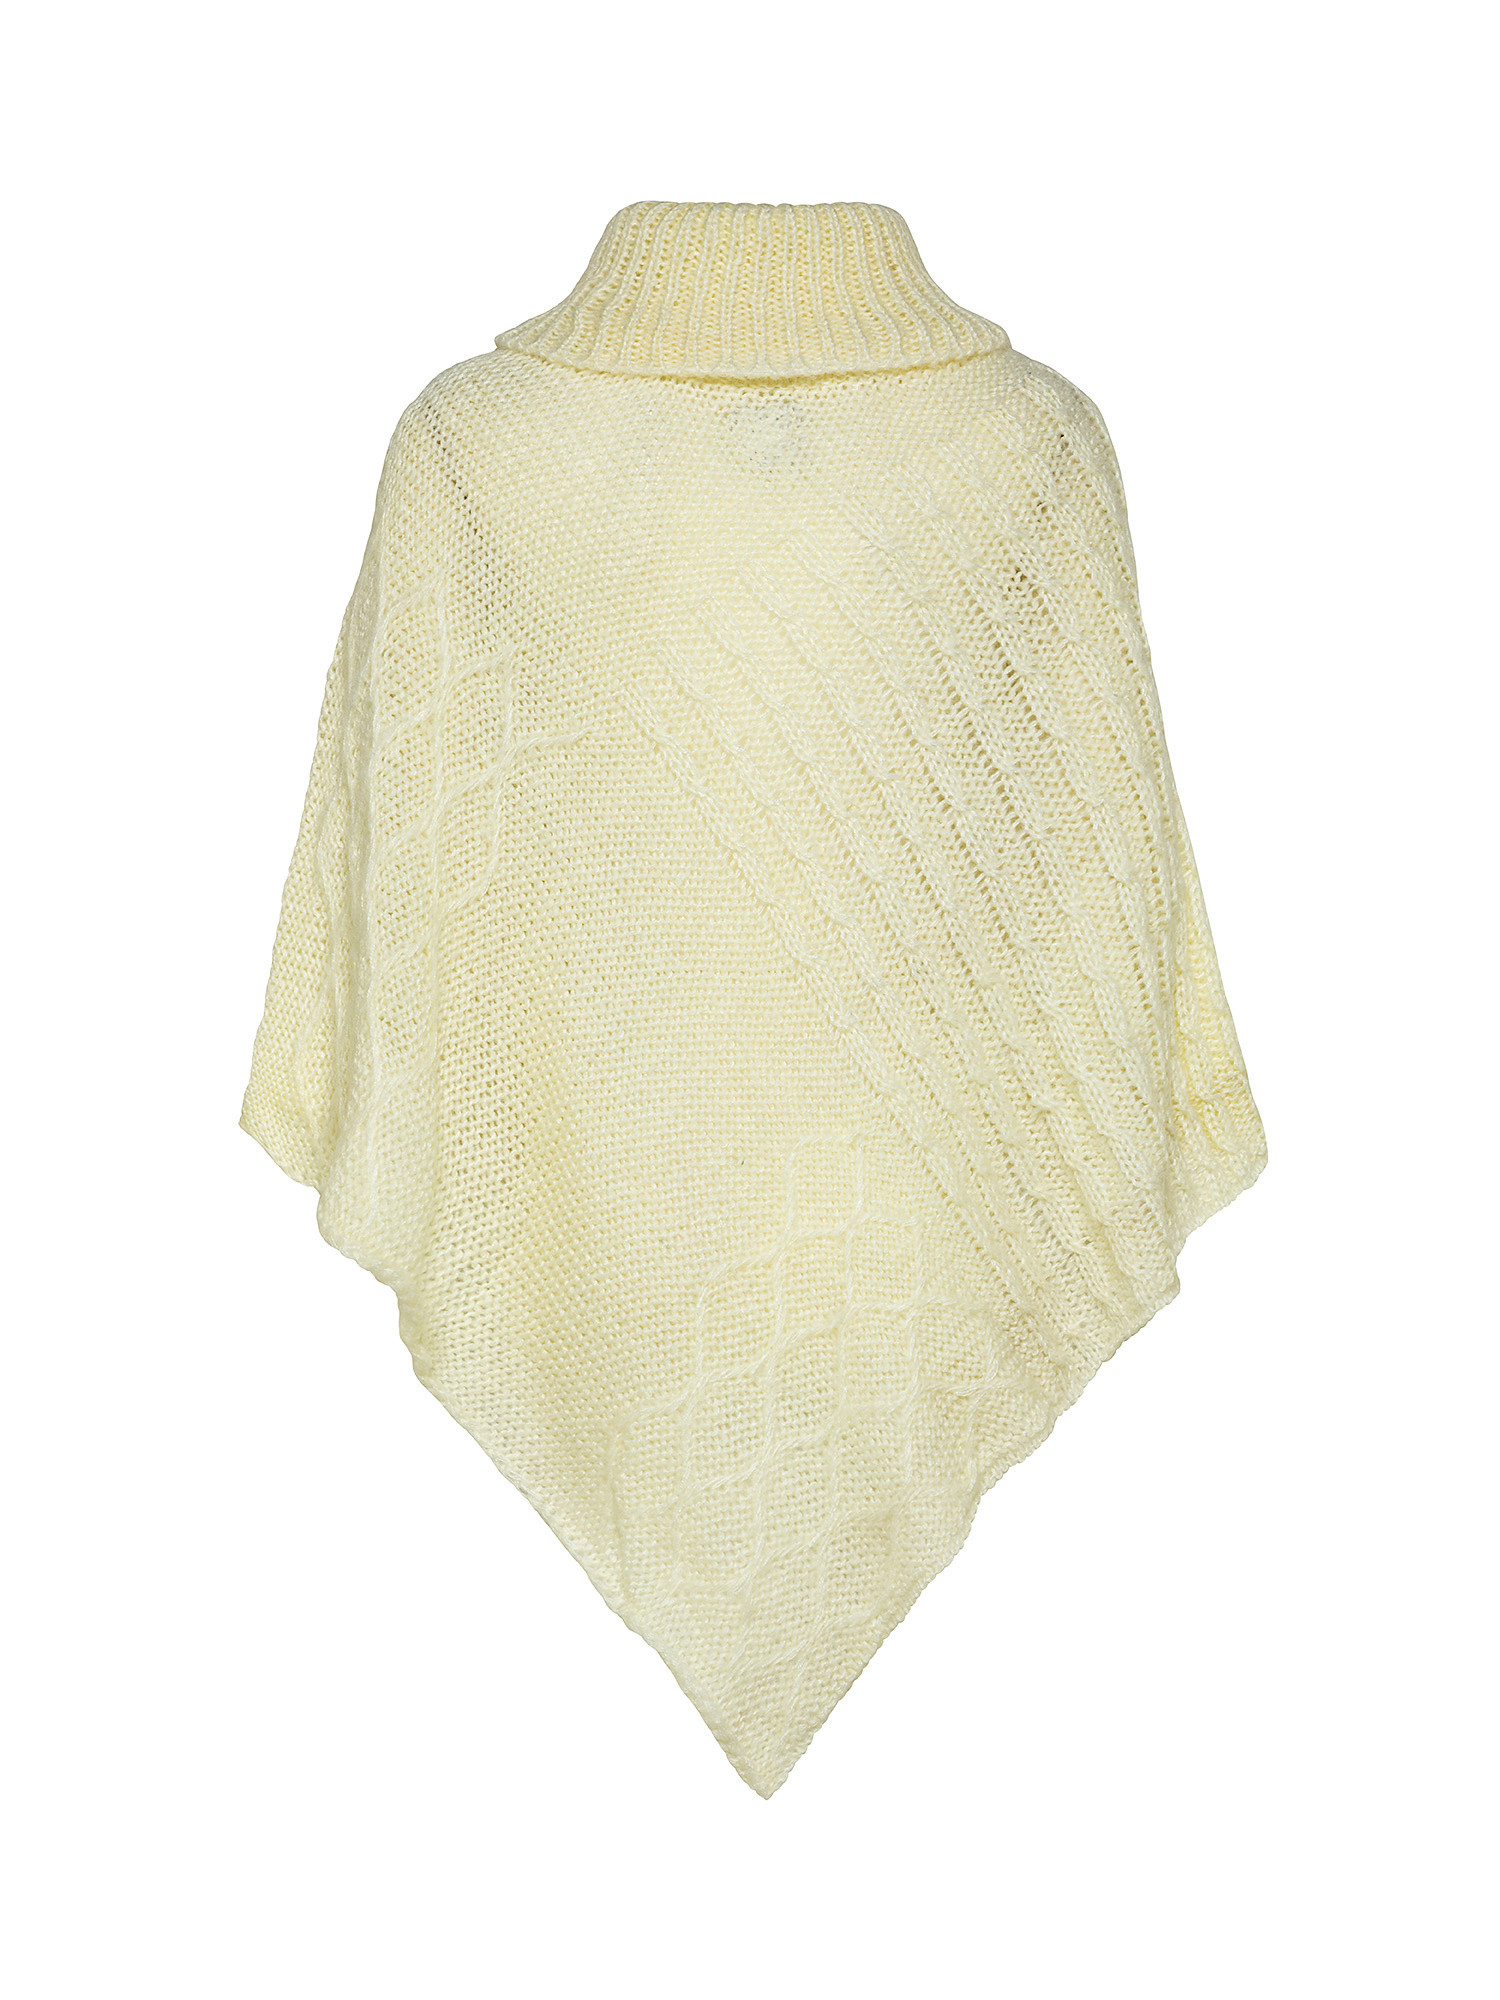 Poncho with high collar, White, large image number 1